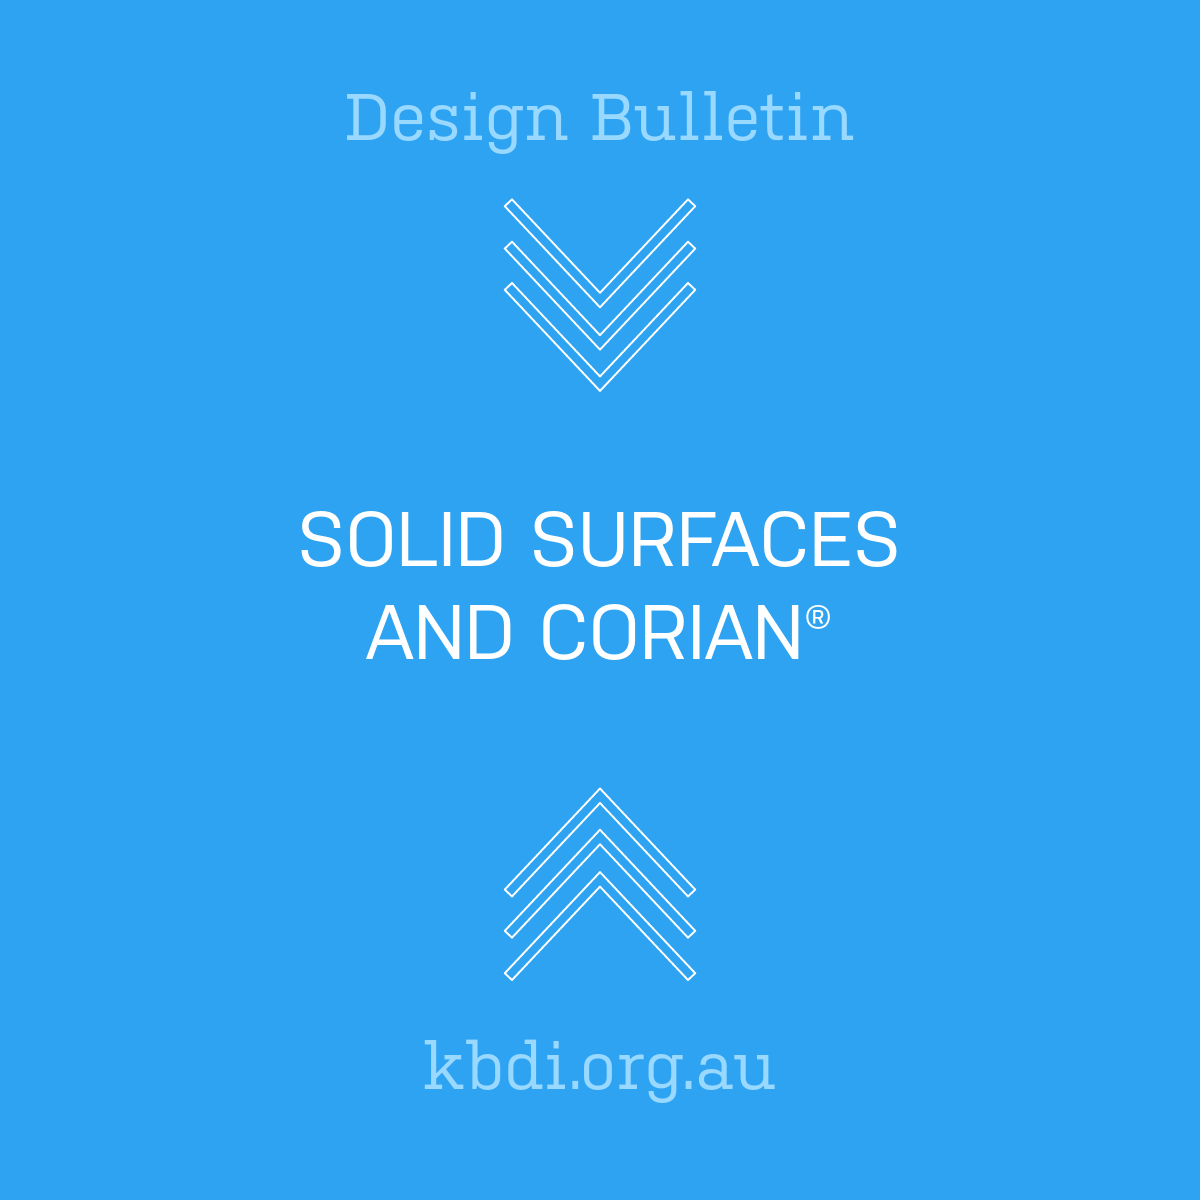 Design Bulletin - Solid Surfaces and Corian